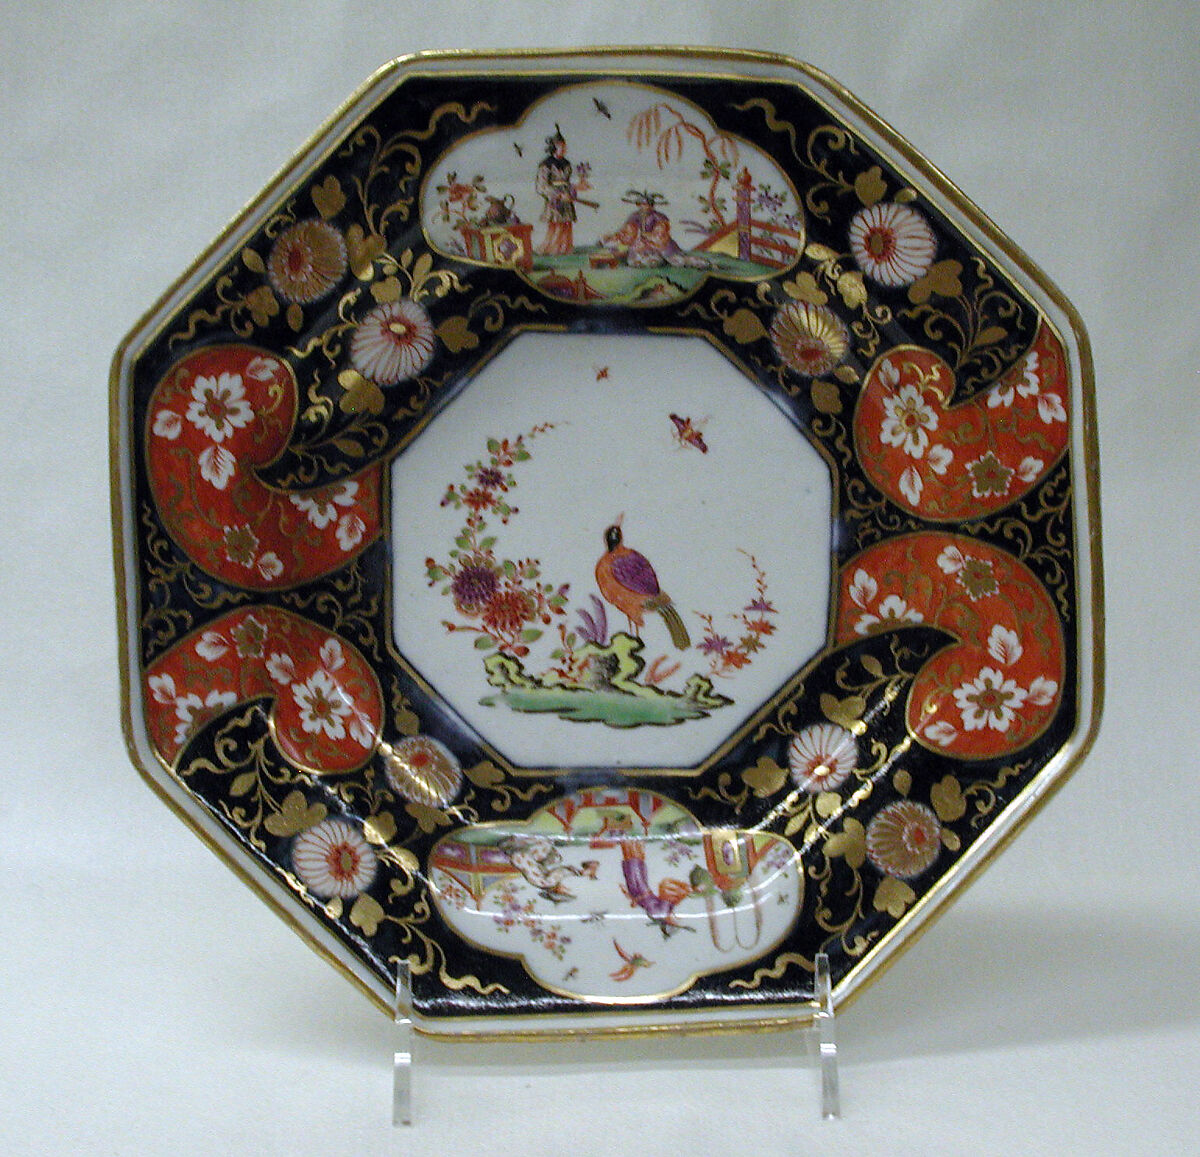 Plate (one of a pair), Imperial Porcelain Manufactory  (Vienna, 1744–1864), Hard-paste porcelain, Austrian, Vienna 